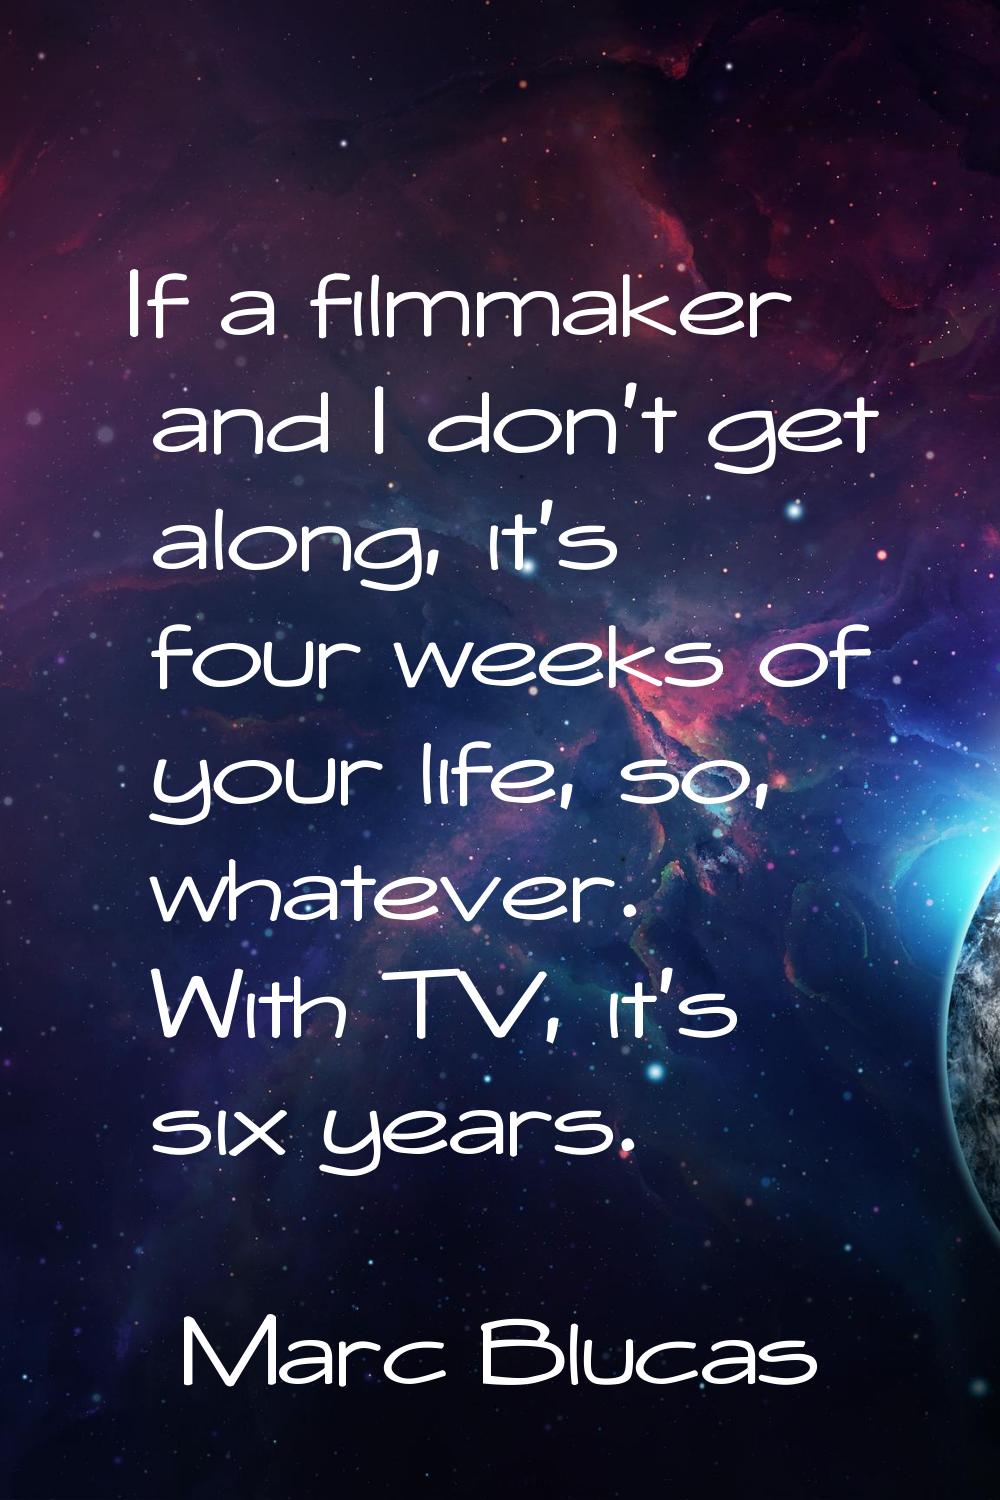 If a filmmaker and I don't get along, it's four weeks of your life, so, whatever. With TV, it's six